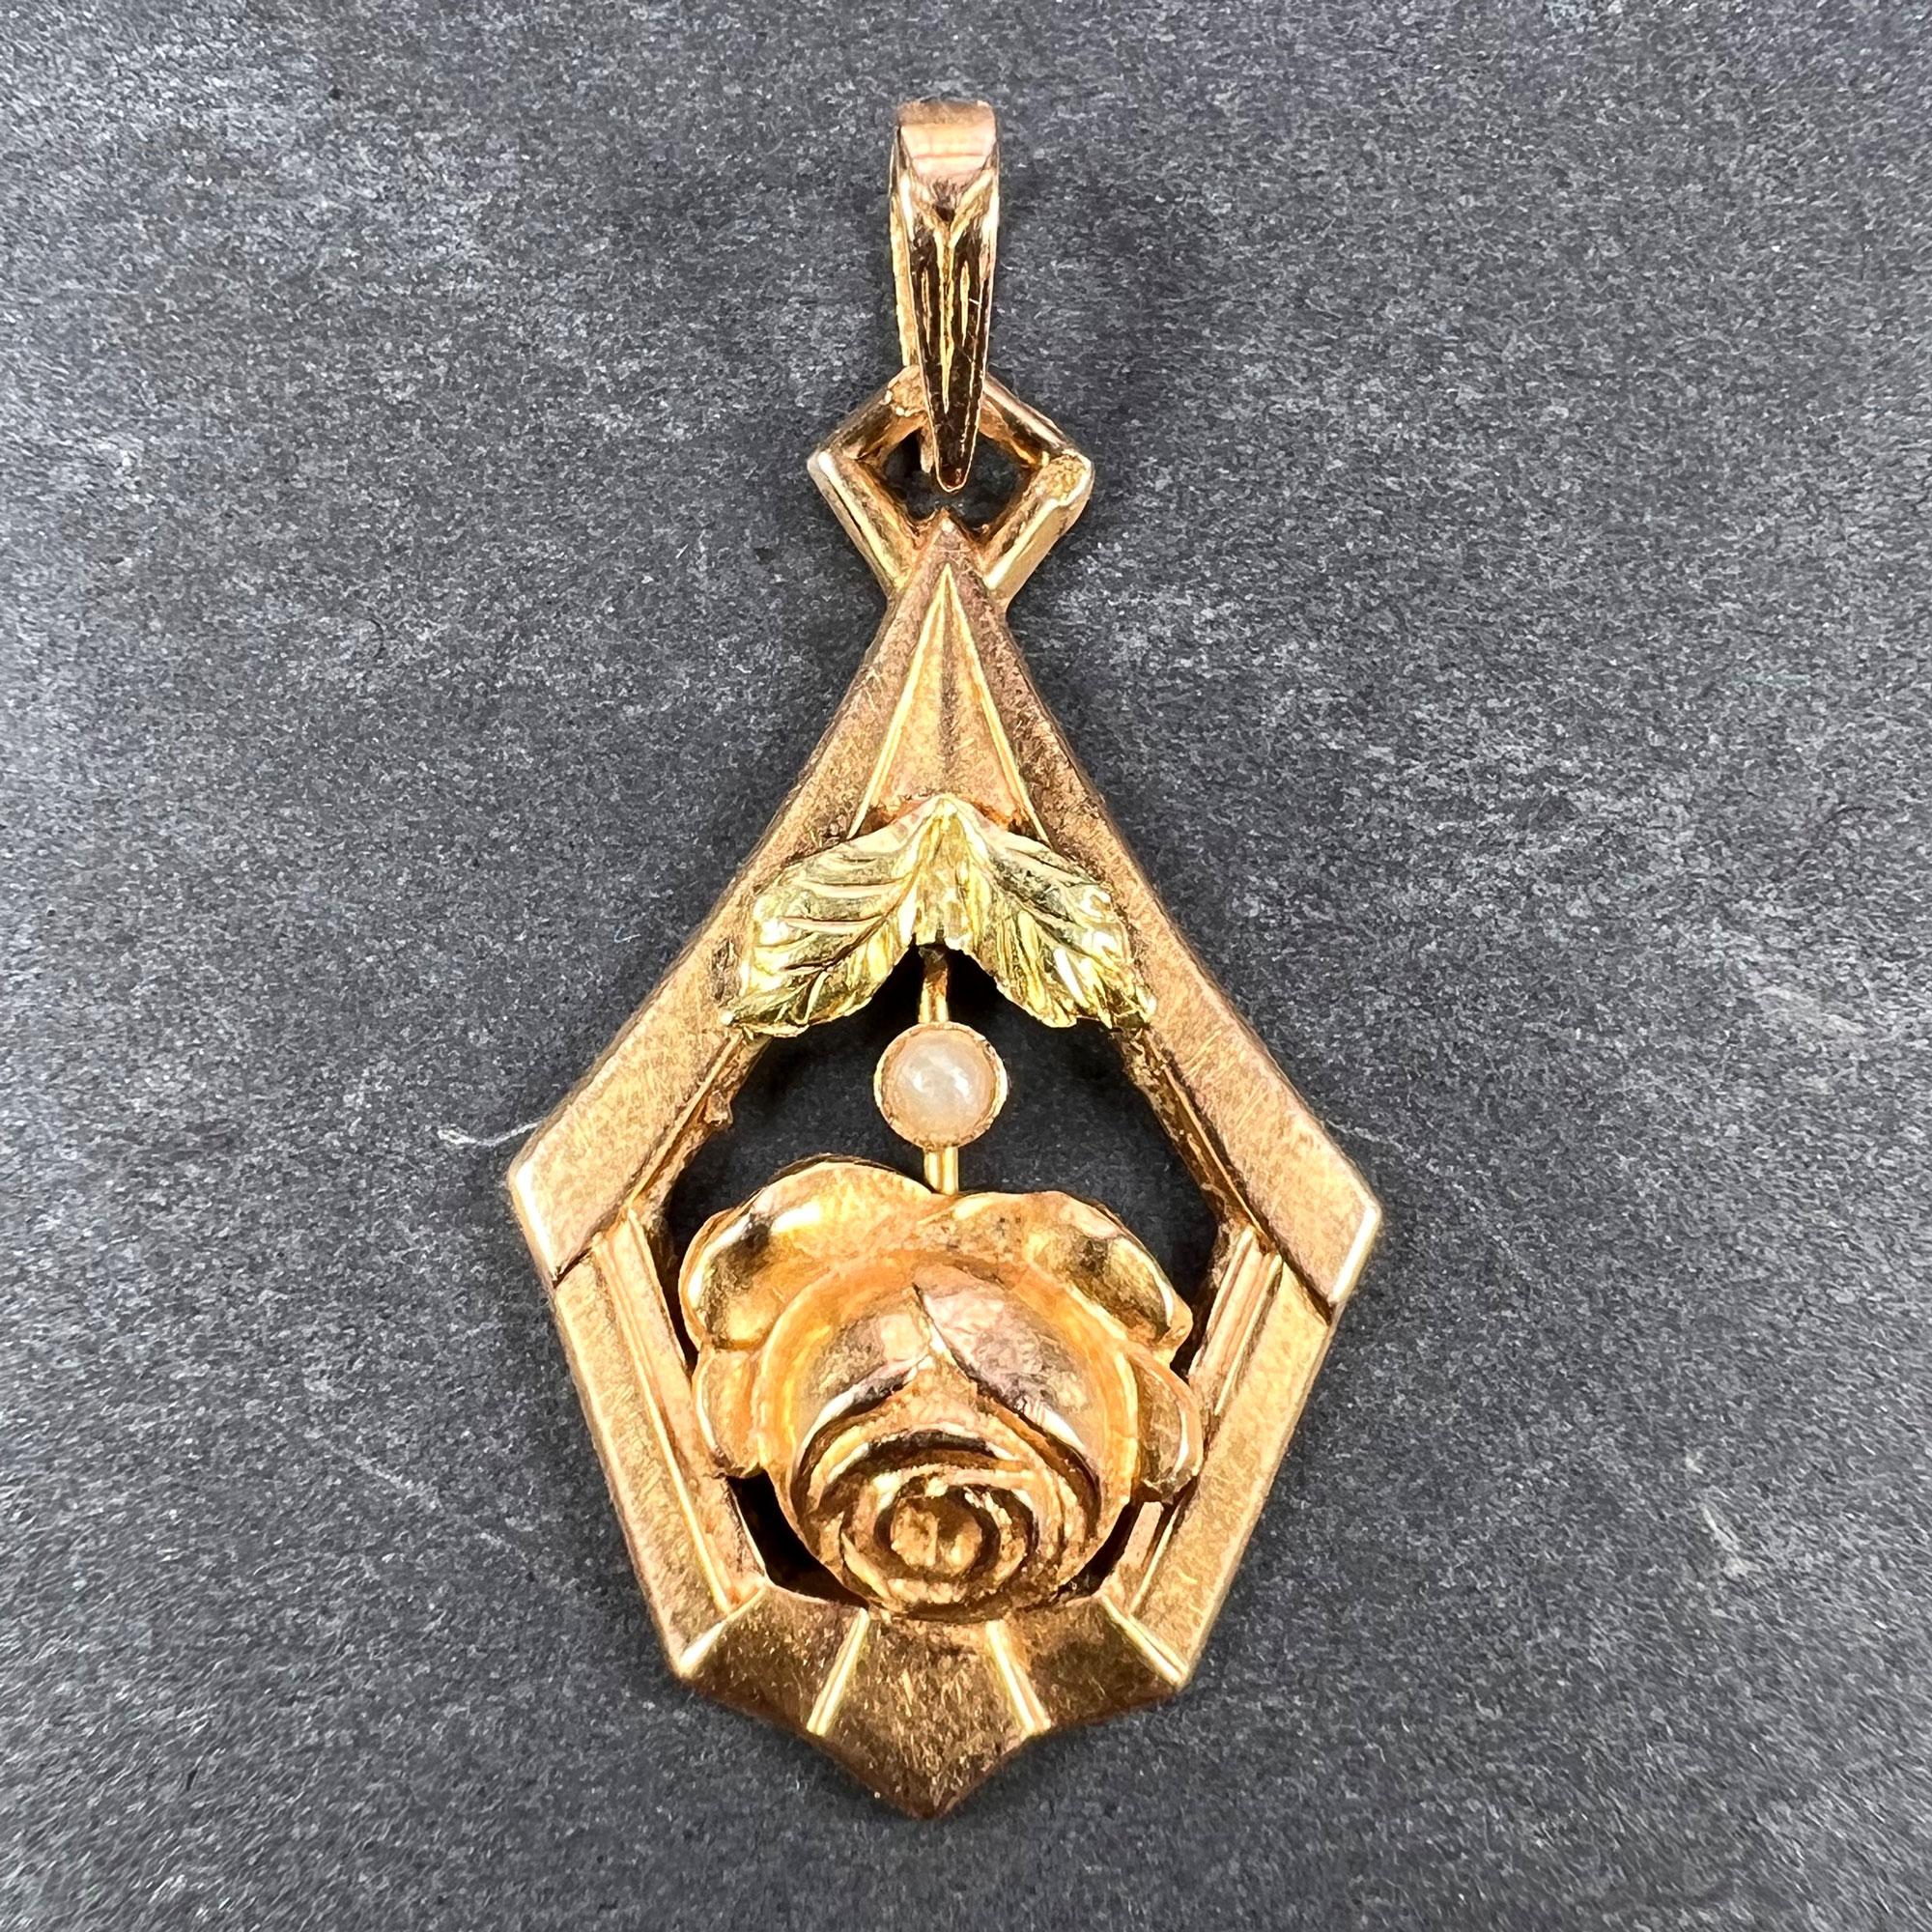 A French 18 karat (18K) yellow gold charm pendant designed as a rose within a frame set with a white seed pearl. Stamped with the eagle’s head mark for 18 karat gold and French manufacture, and an unknown maker’s mark.

Dimensions: 2.5 x 1.5 x 0.3